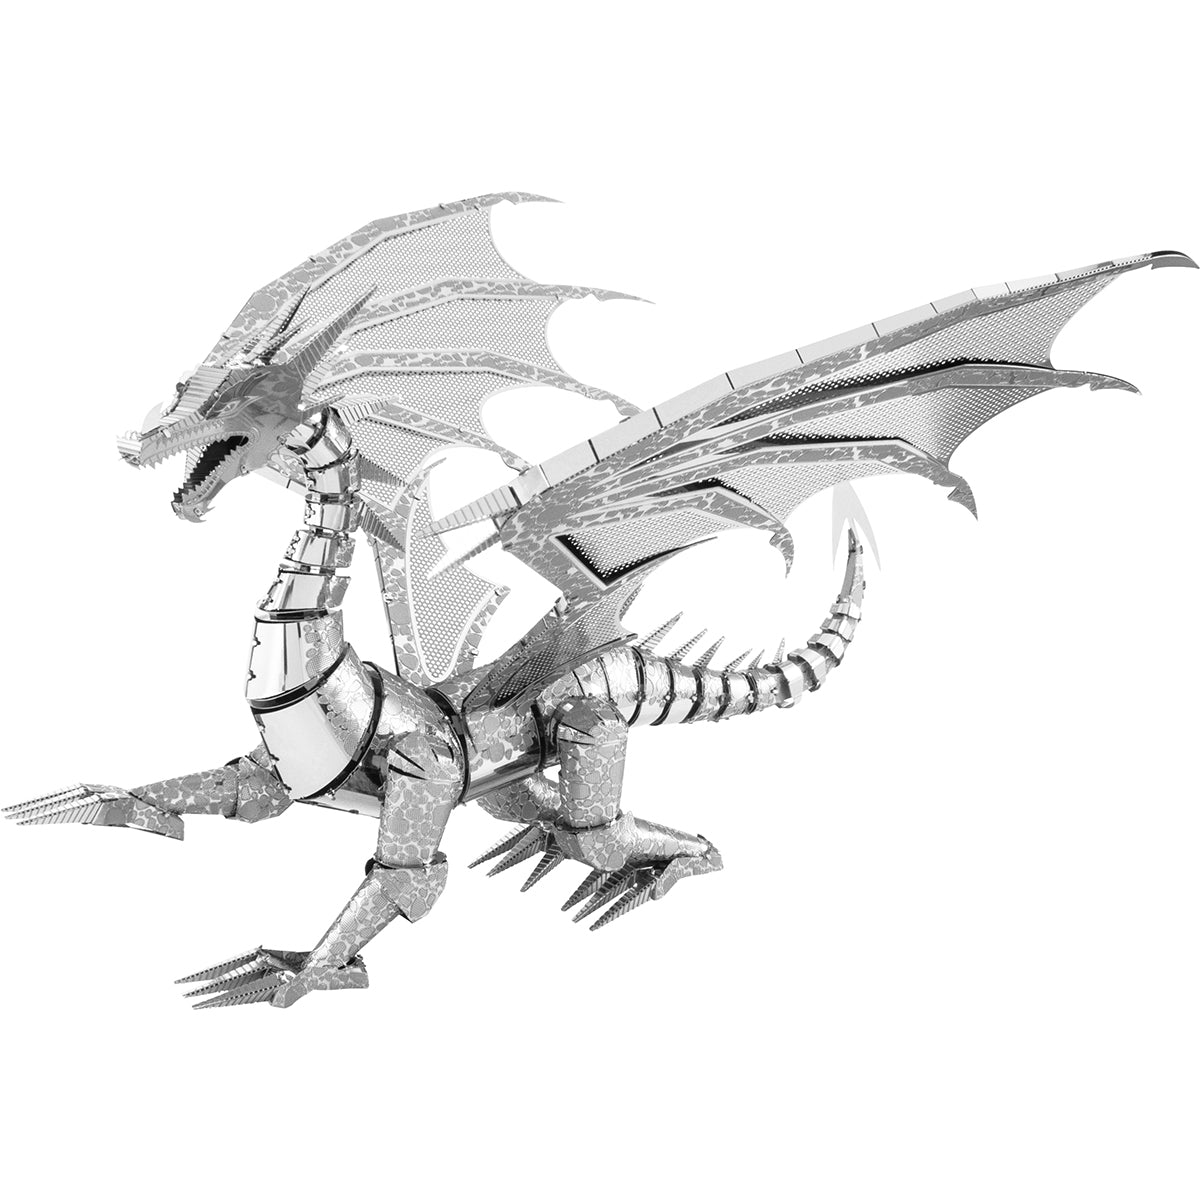 Front right side view of completed Silver Dragon from the steel model kit.